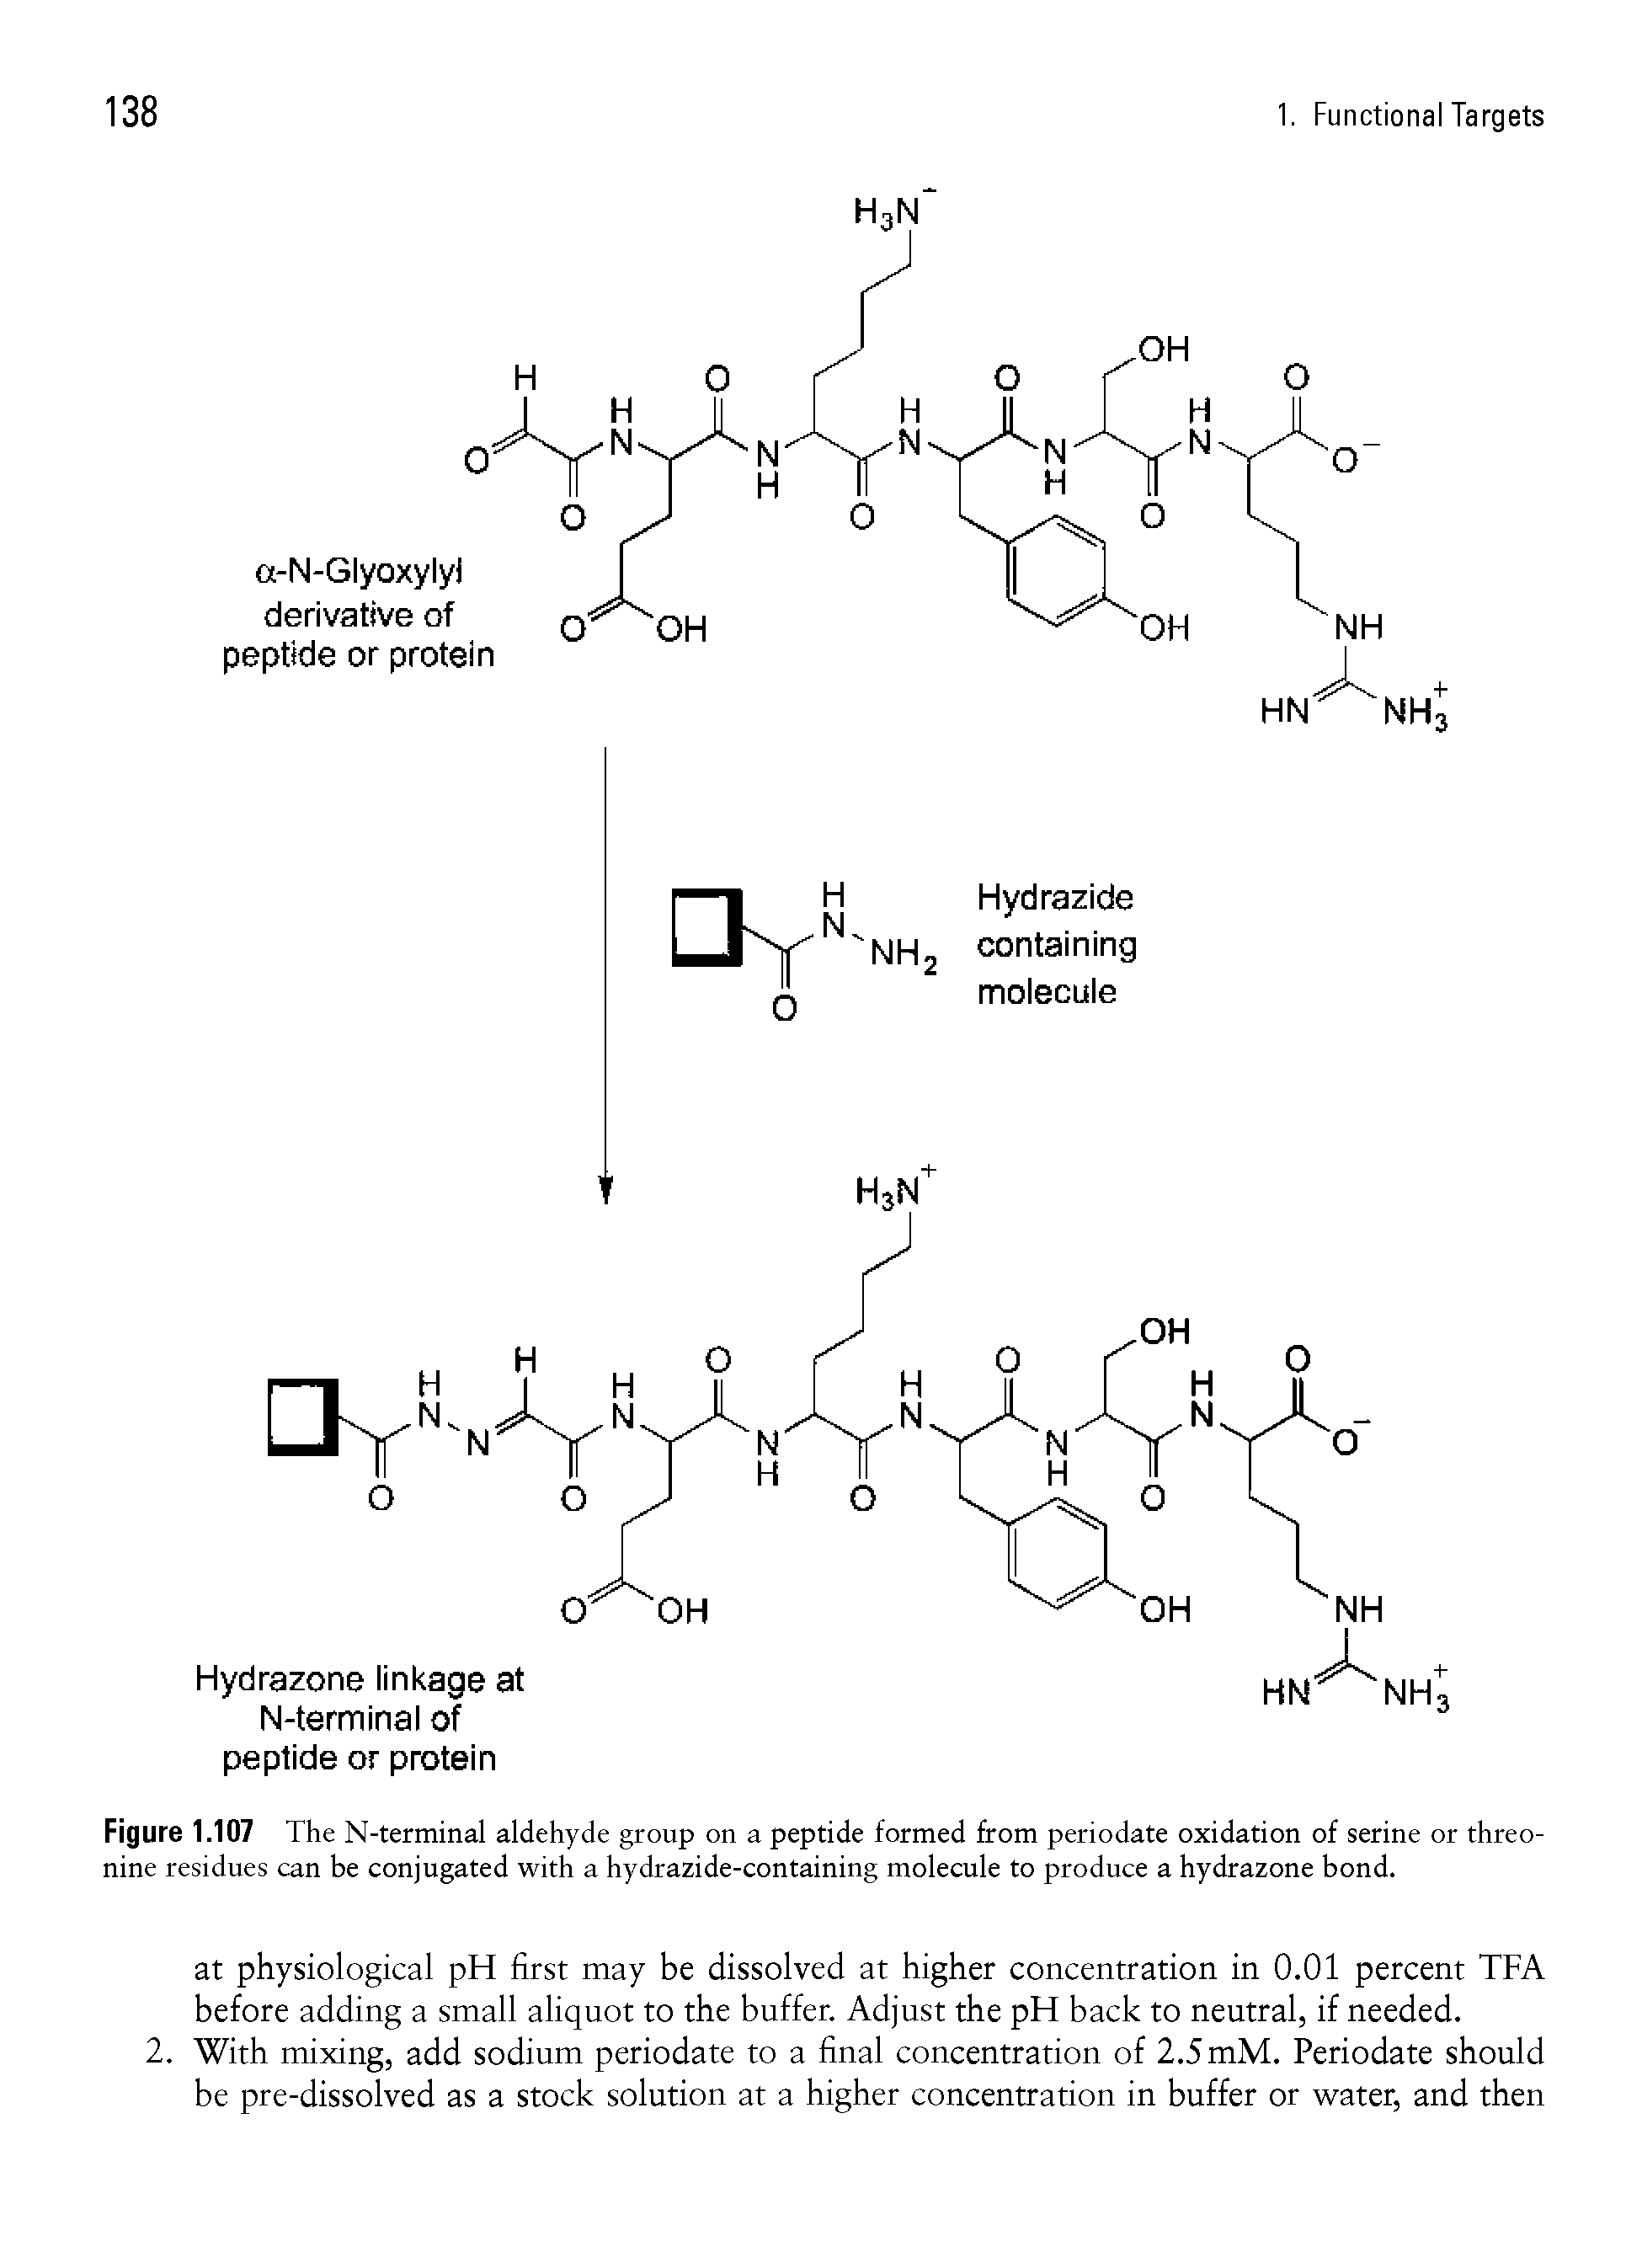 Figure 1.107 The N-terminal aldehyde group on a peptide formed from periodate oxidation of serine or threonine residues can be conjugated with a hydrazide-containing molecule to produce a hydrazone bond.